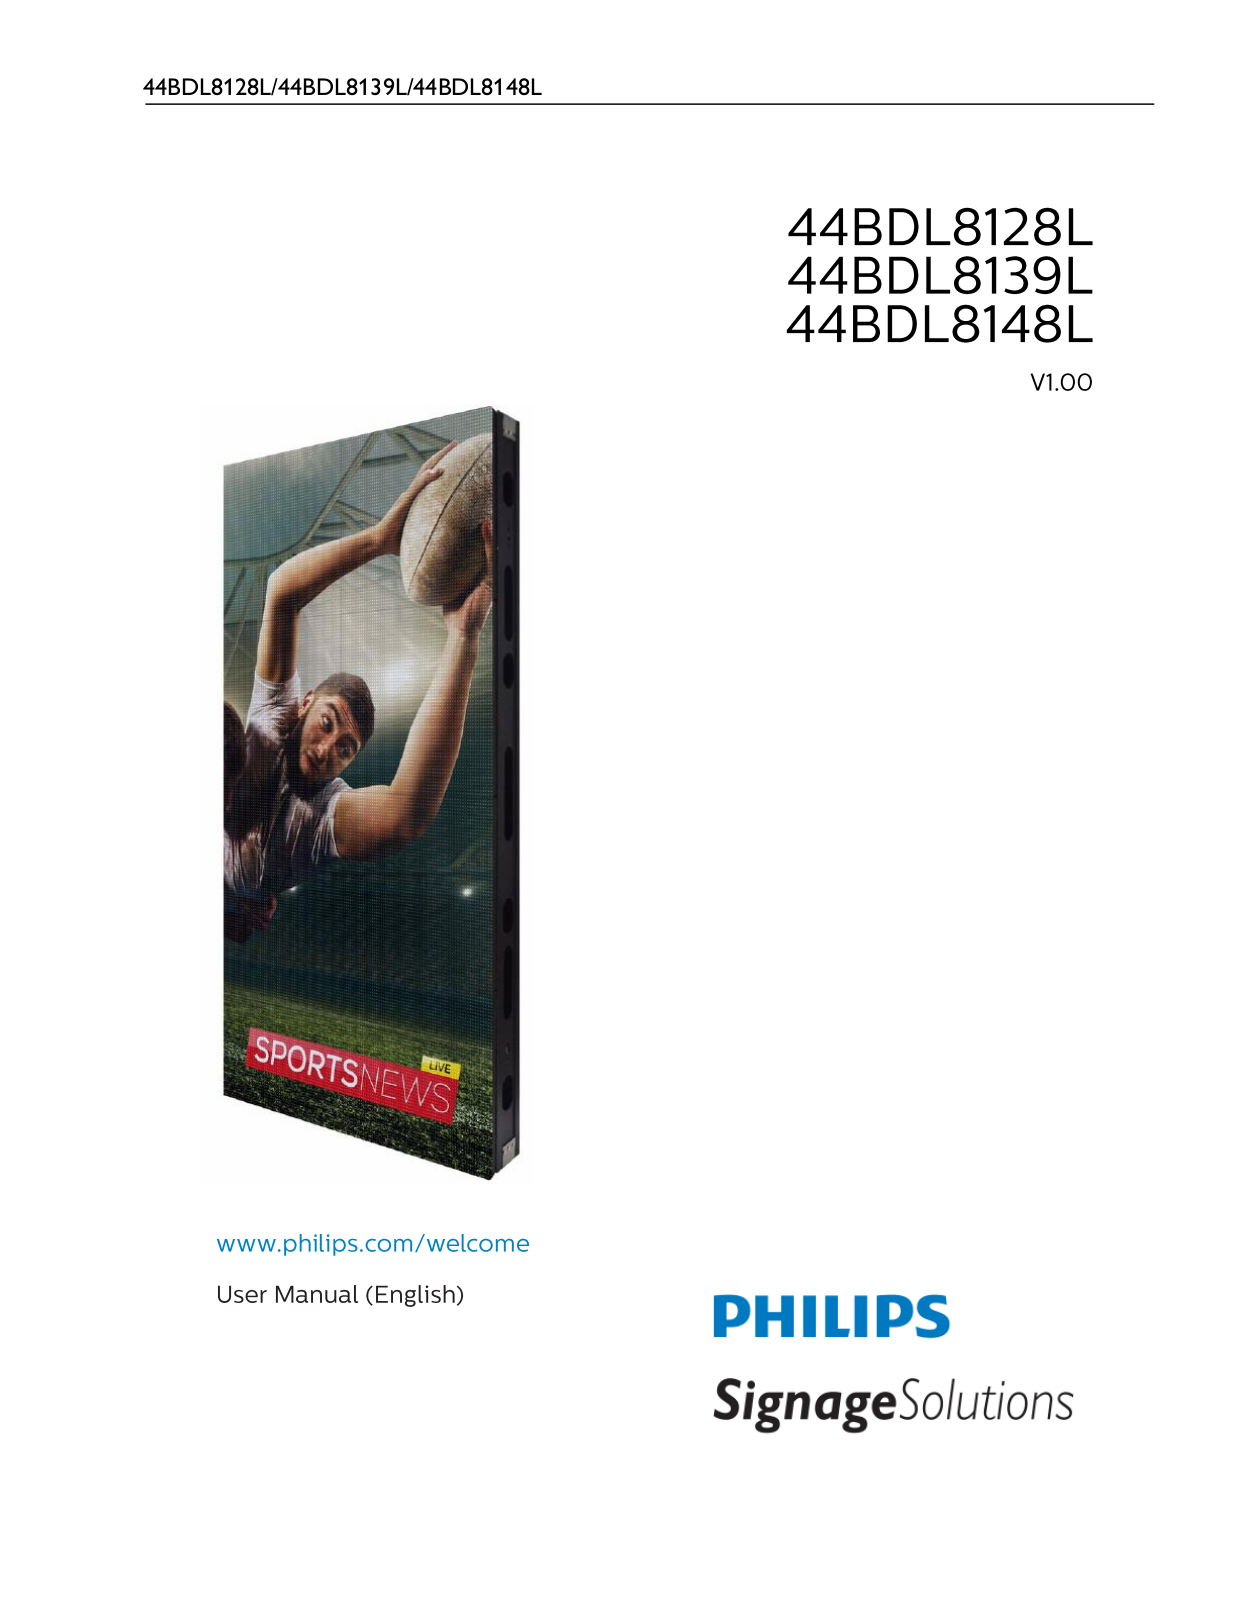 Philips 44BDL8148L User Guide